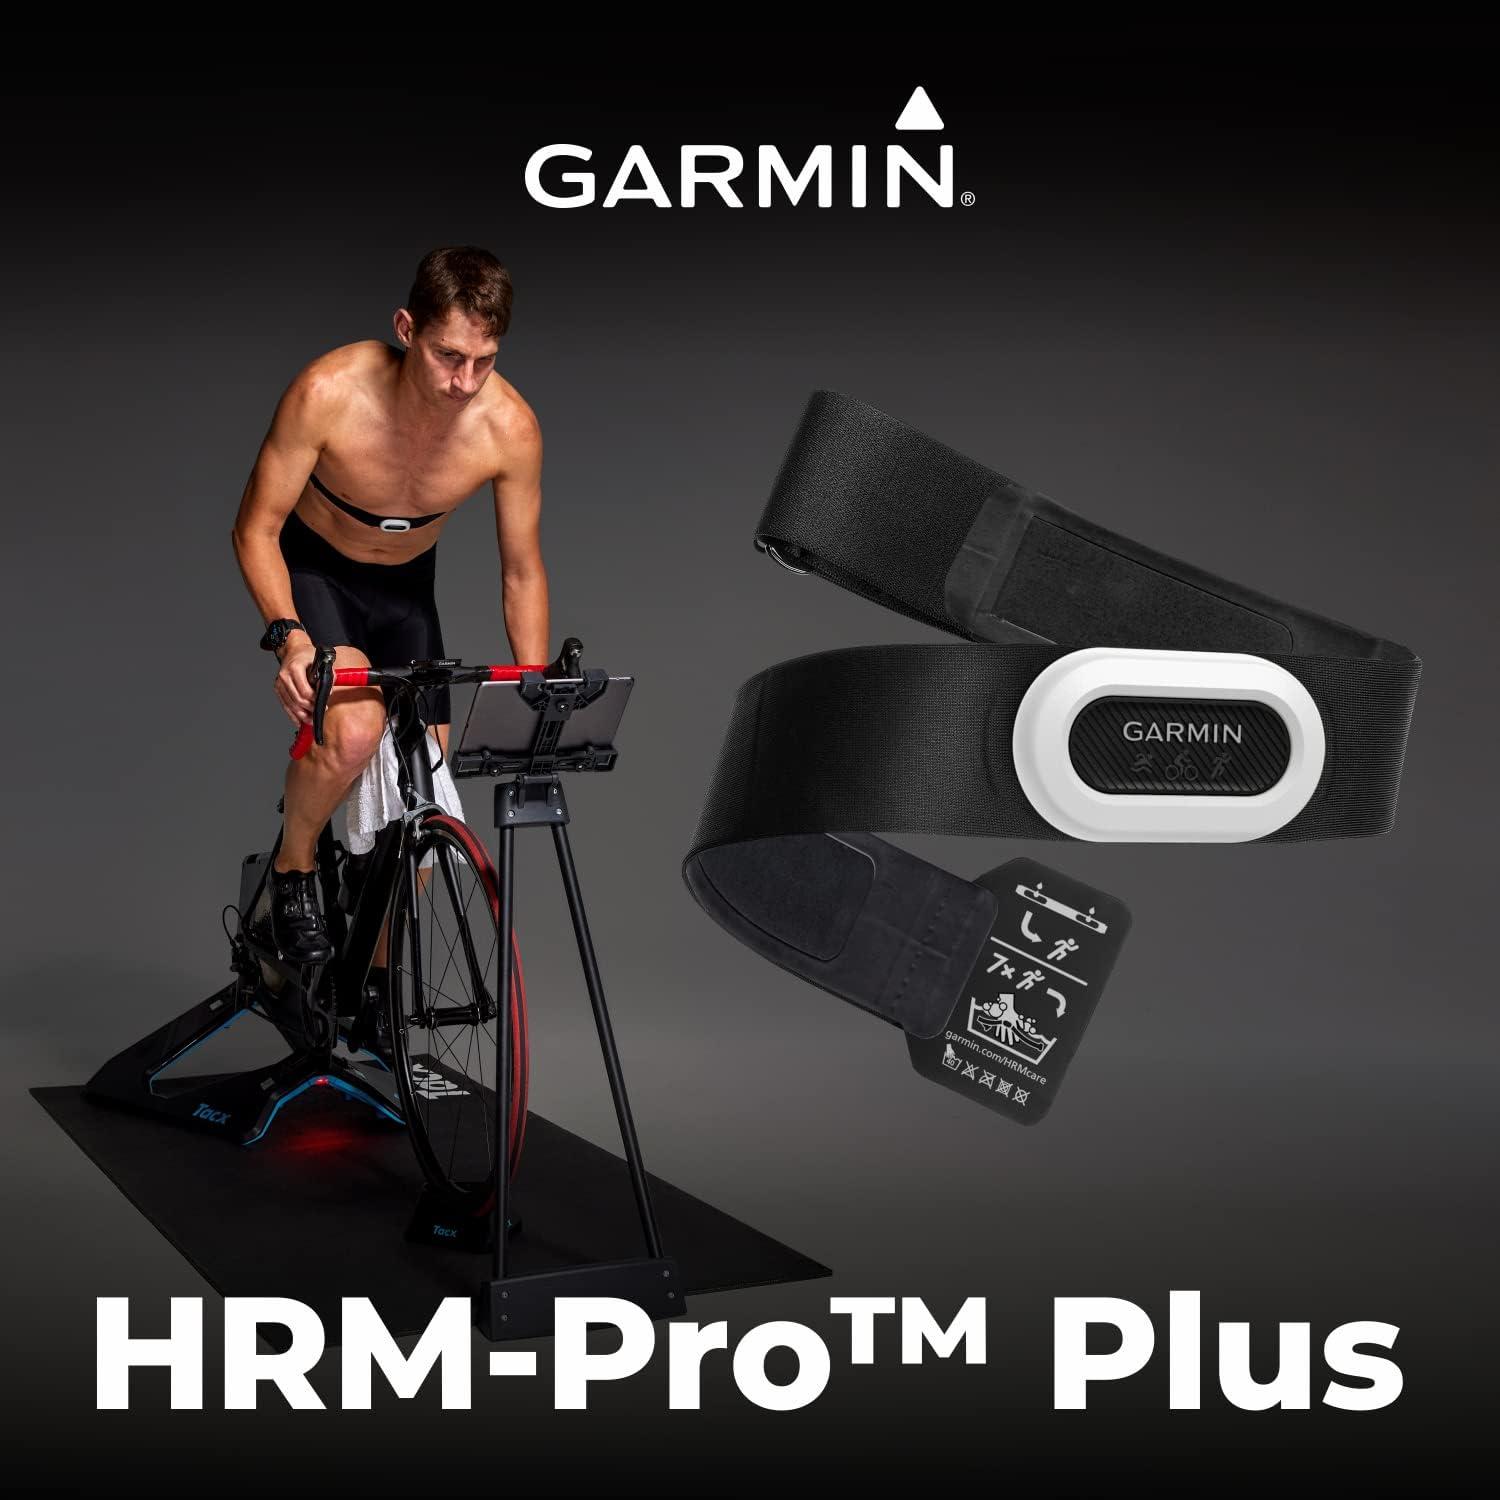 Garmin HRM-Pro Plus Heart Rate Monitor - Black (010-13118-00) for